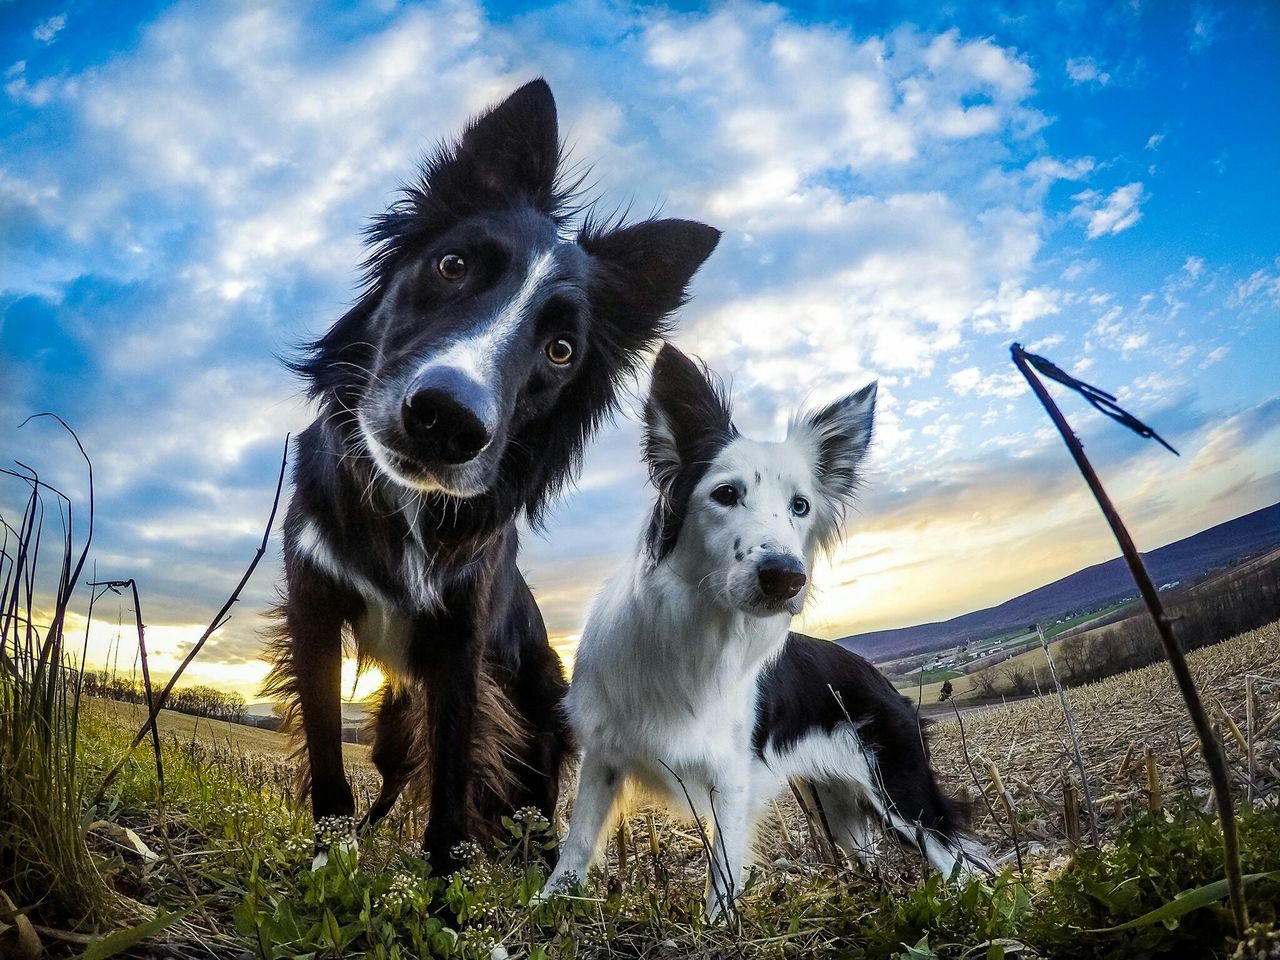 mammal, animal themes, domestic animals, one animal, pets, dog, sky, portrait, looking at camera, cloud - sky, standing, field, grass, nature, cloud, outdoors, front view, no people, day, vertebrate